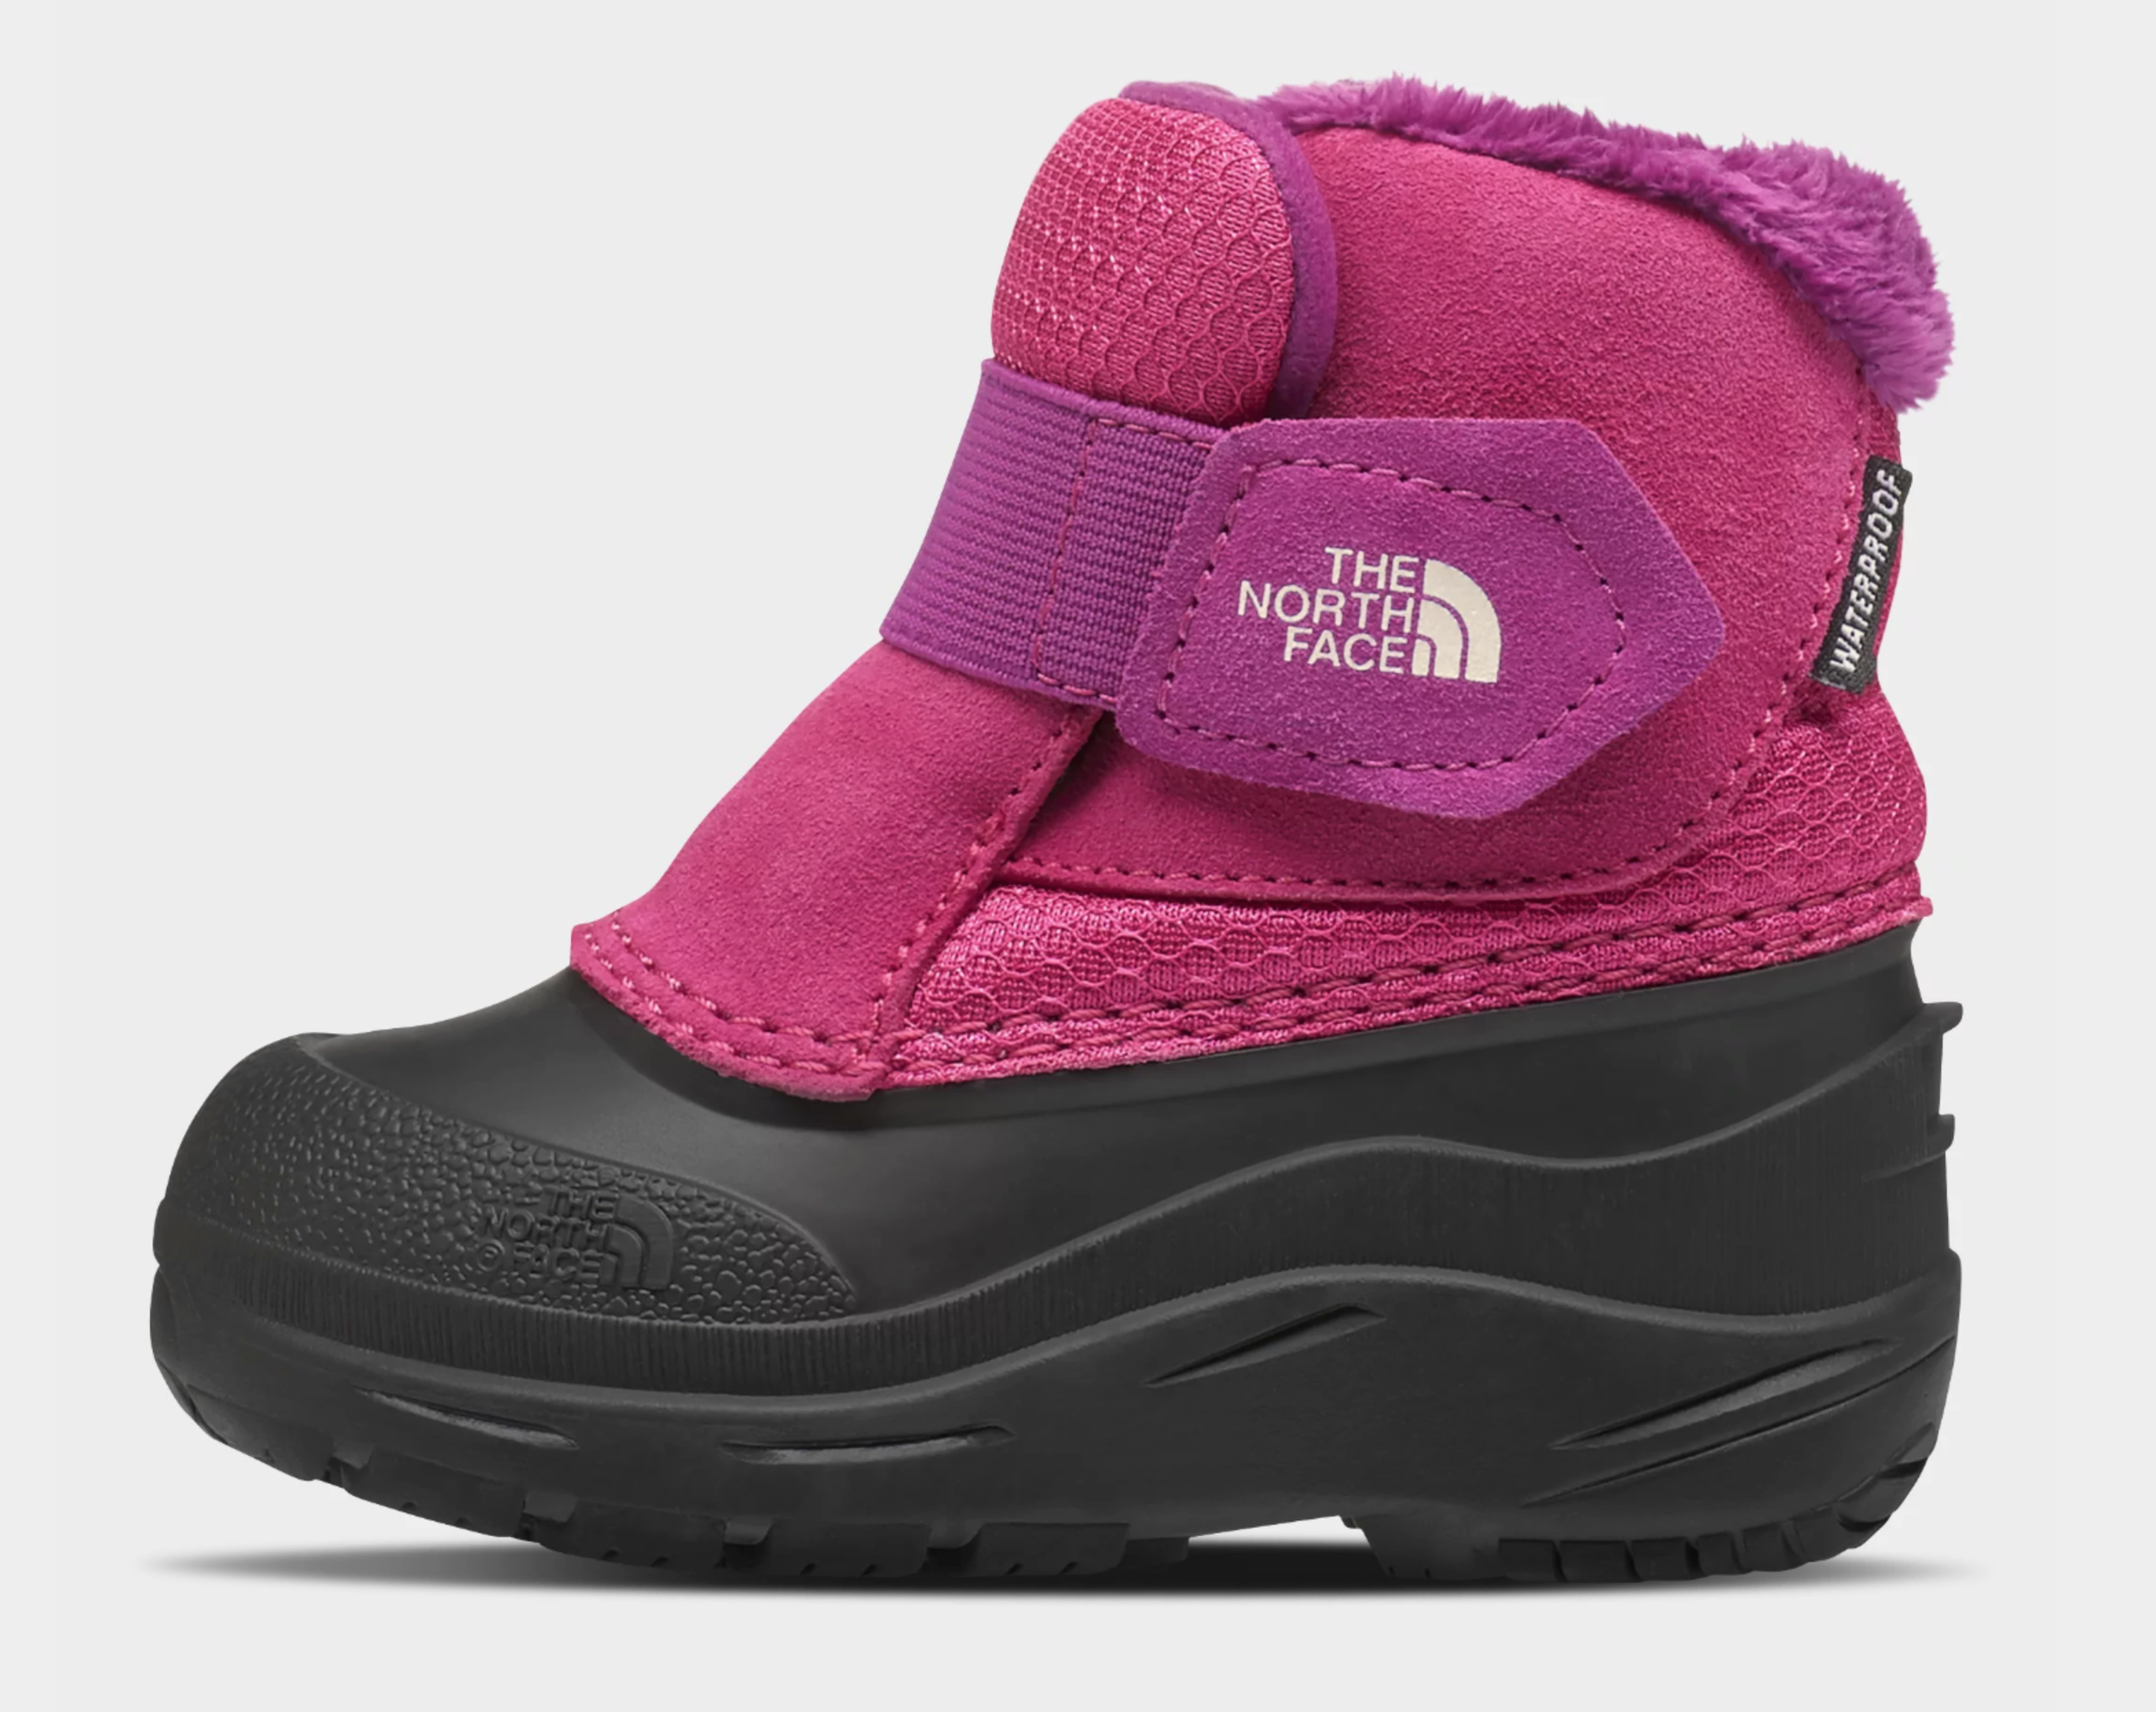 The North Face Toddler Alpenglow II Snow Boots - Mountain Kids Canada, White Background - F Pink/C Sunrise Color side view